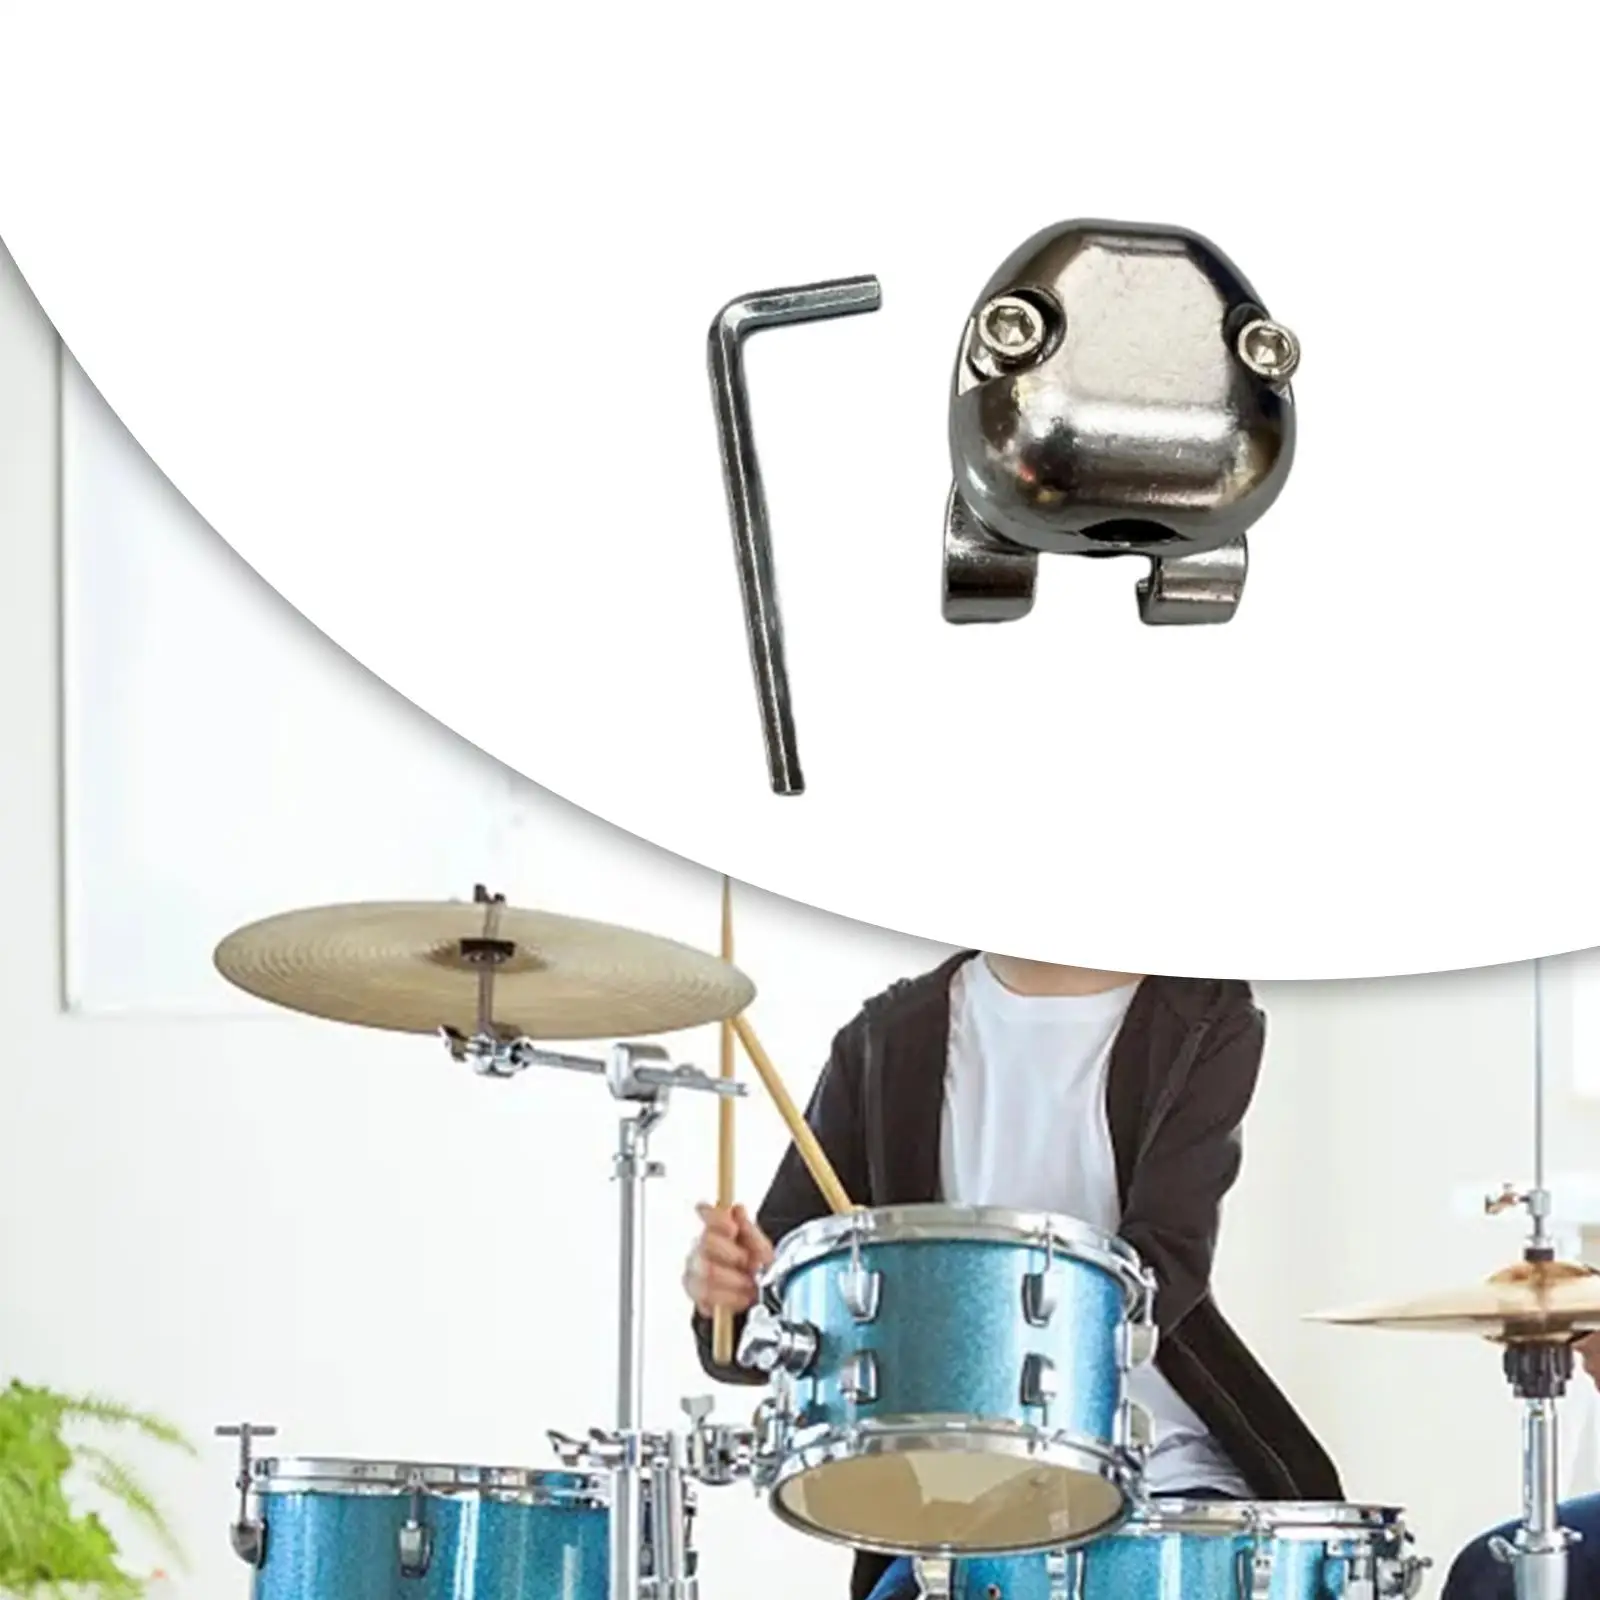 Cymbal Clip Connecting Clamp Percussion Instrument Parts Portable Professional Attachment Hardware Cymbal Mounting Clamp